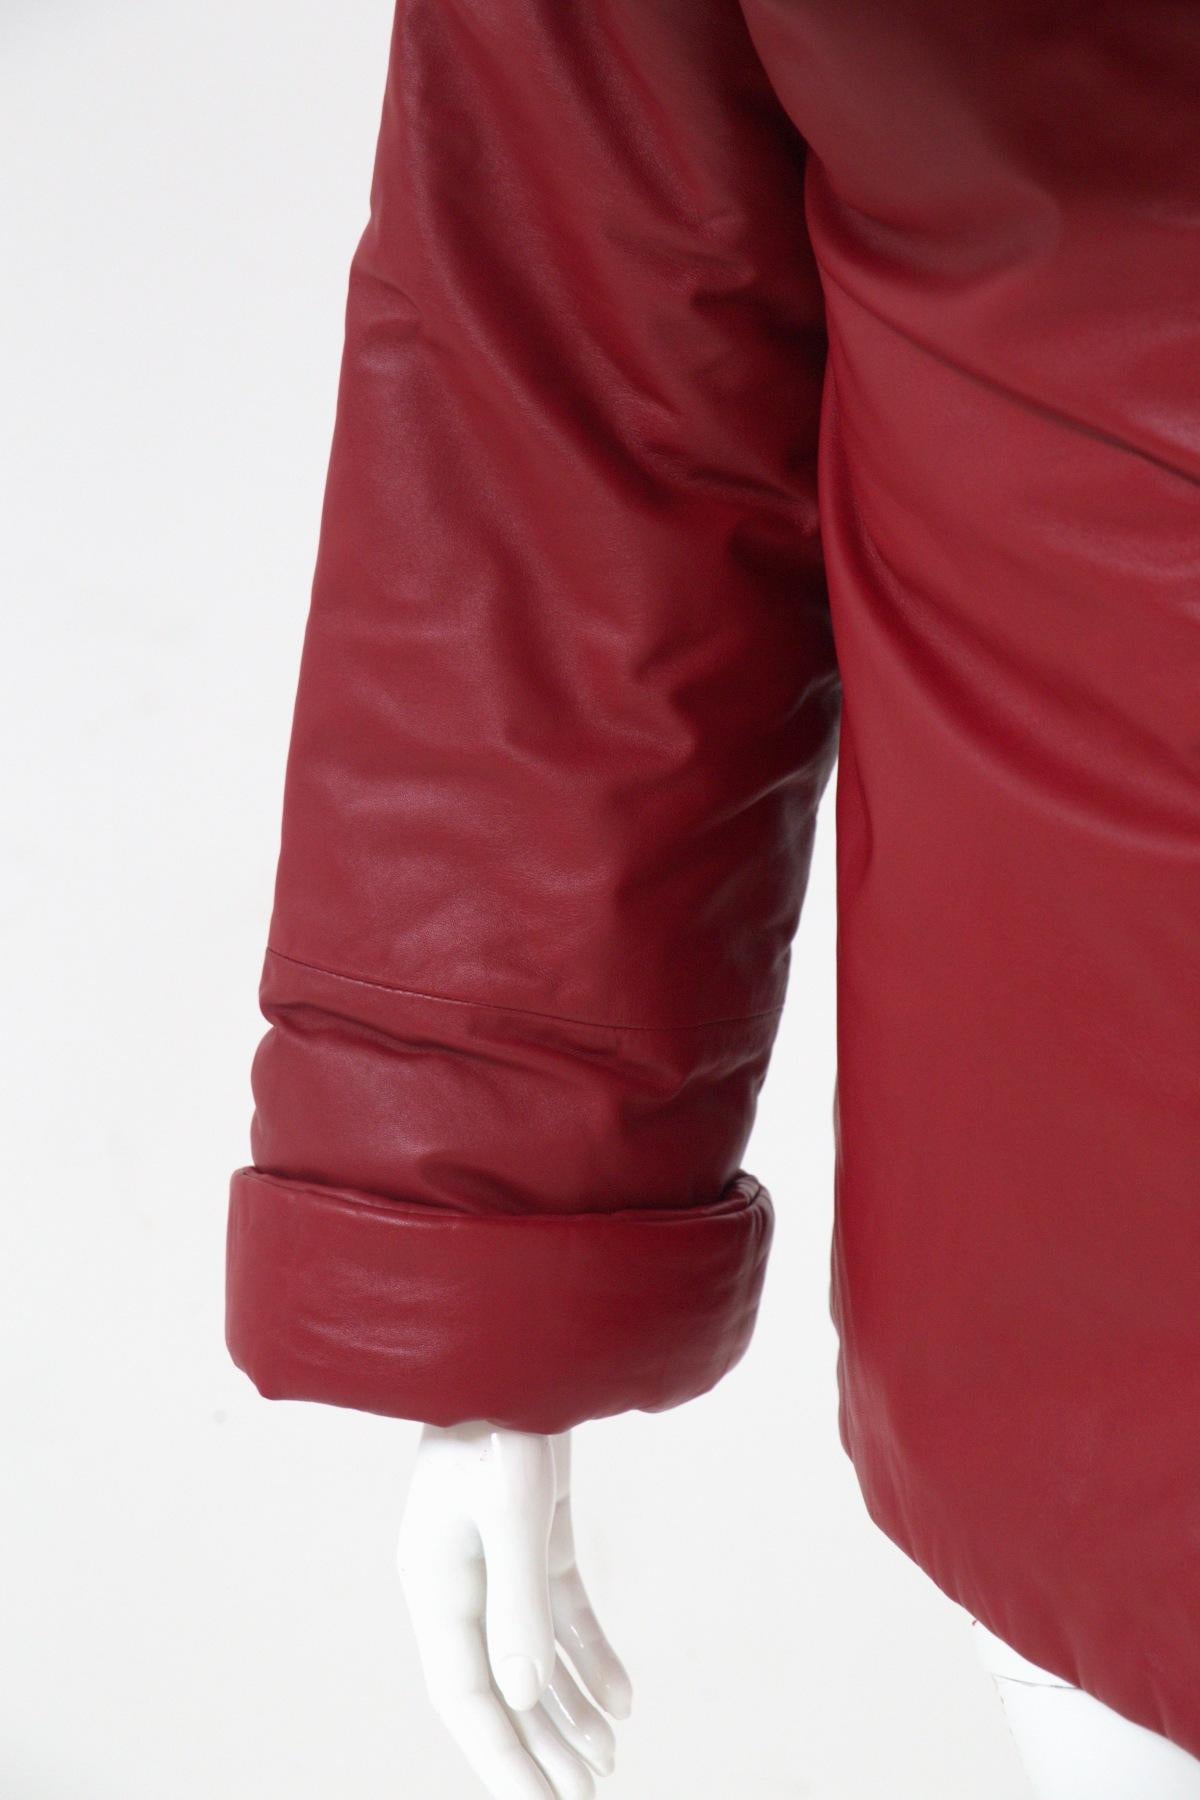 Gianfranco Ferré Rare Oversized Red Leather Jacket In Good Condition For Sale In Milano, IT